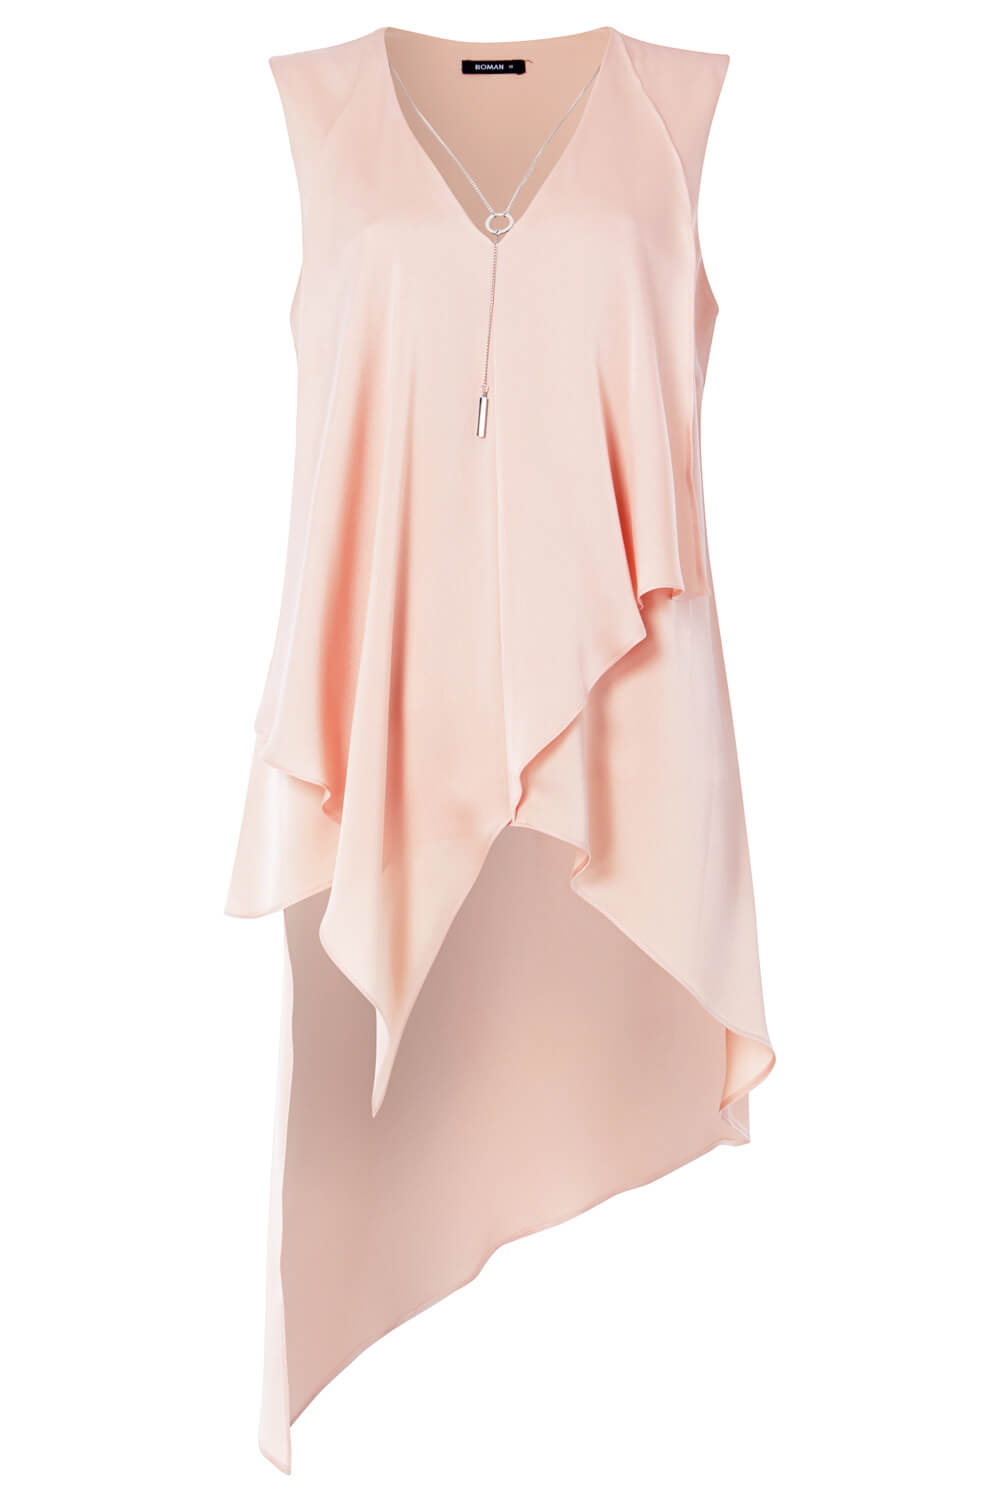 Light Pink Sleeveless Asymmetric Necklace Top , Image 4 of 7